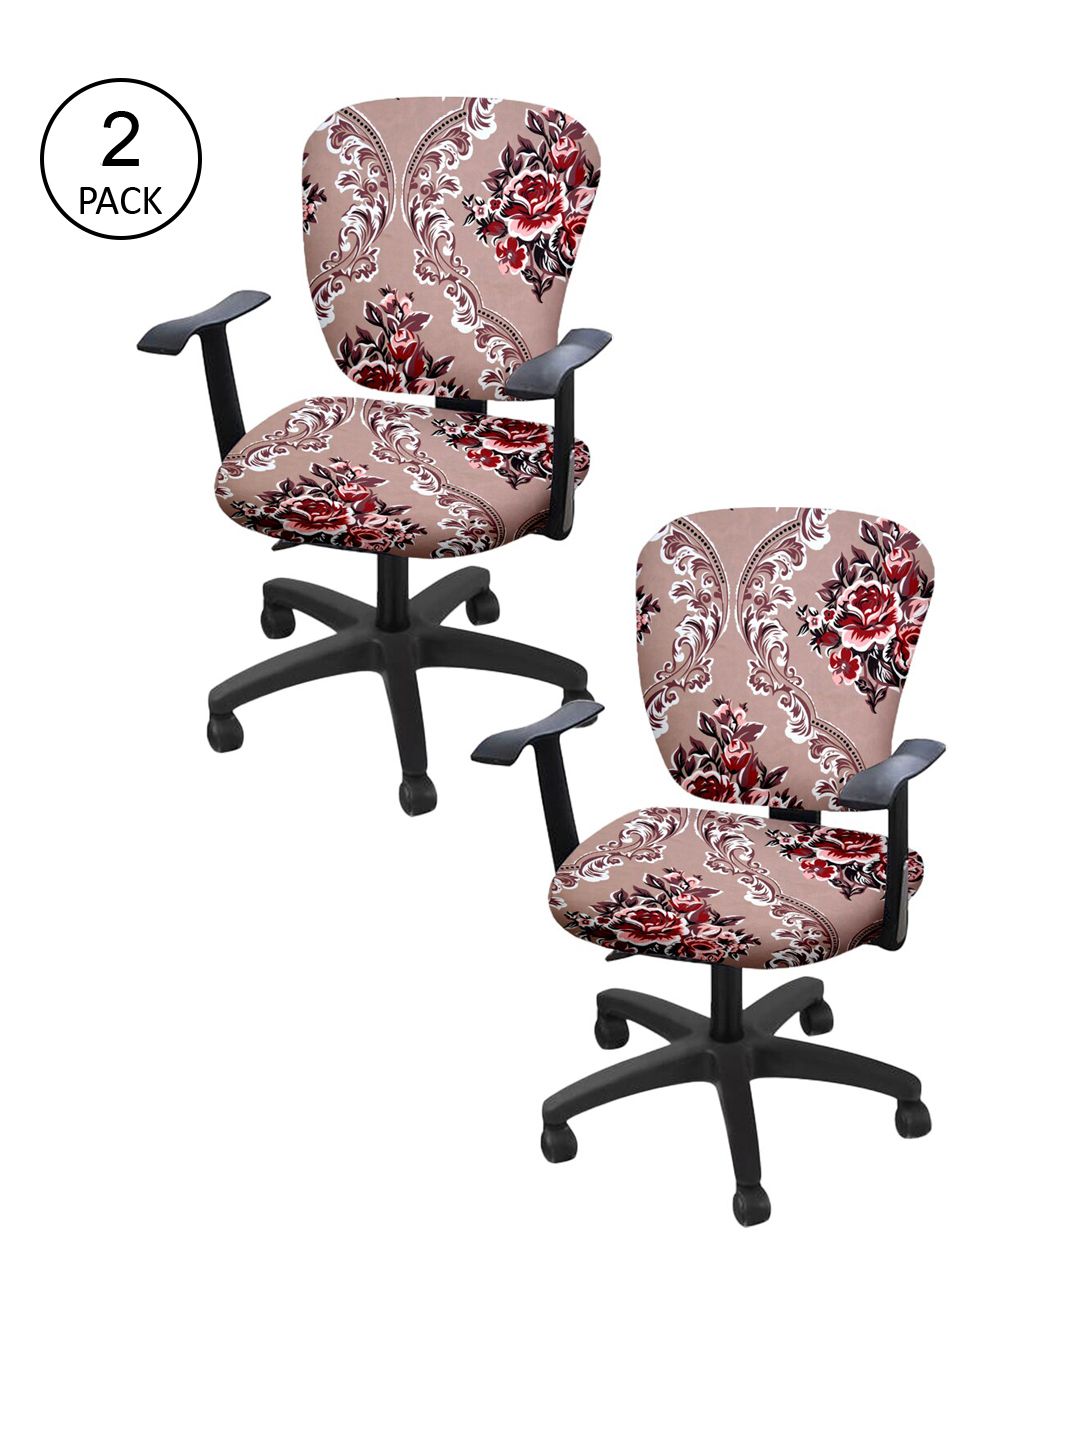 Cortina Set Of 2 Beige & Maroon Floral Print Chair Covers Price in India